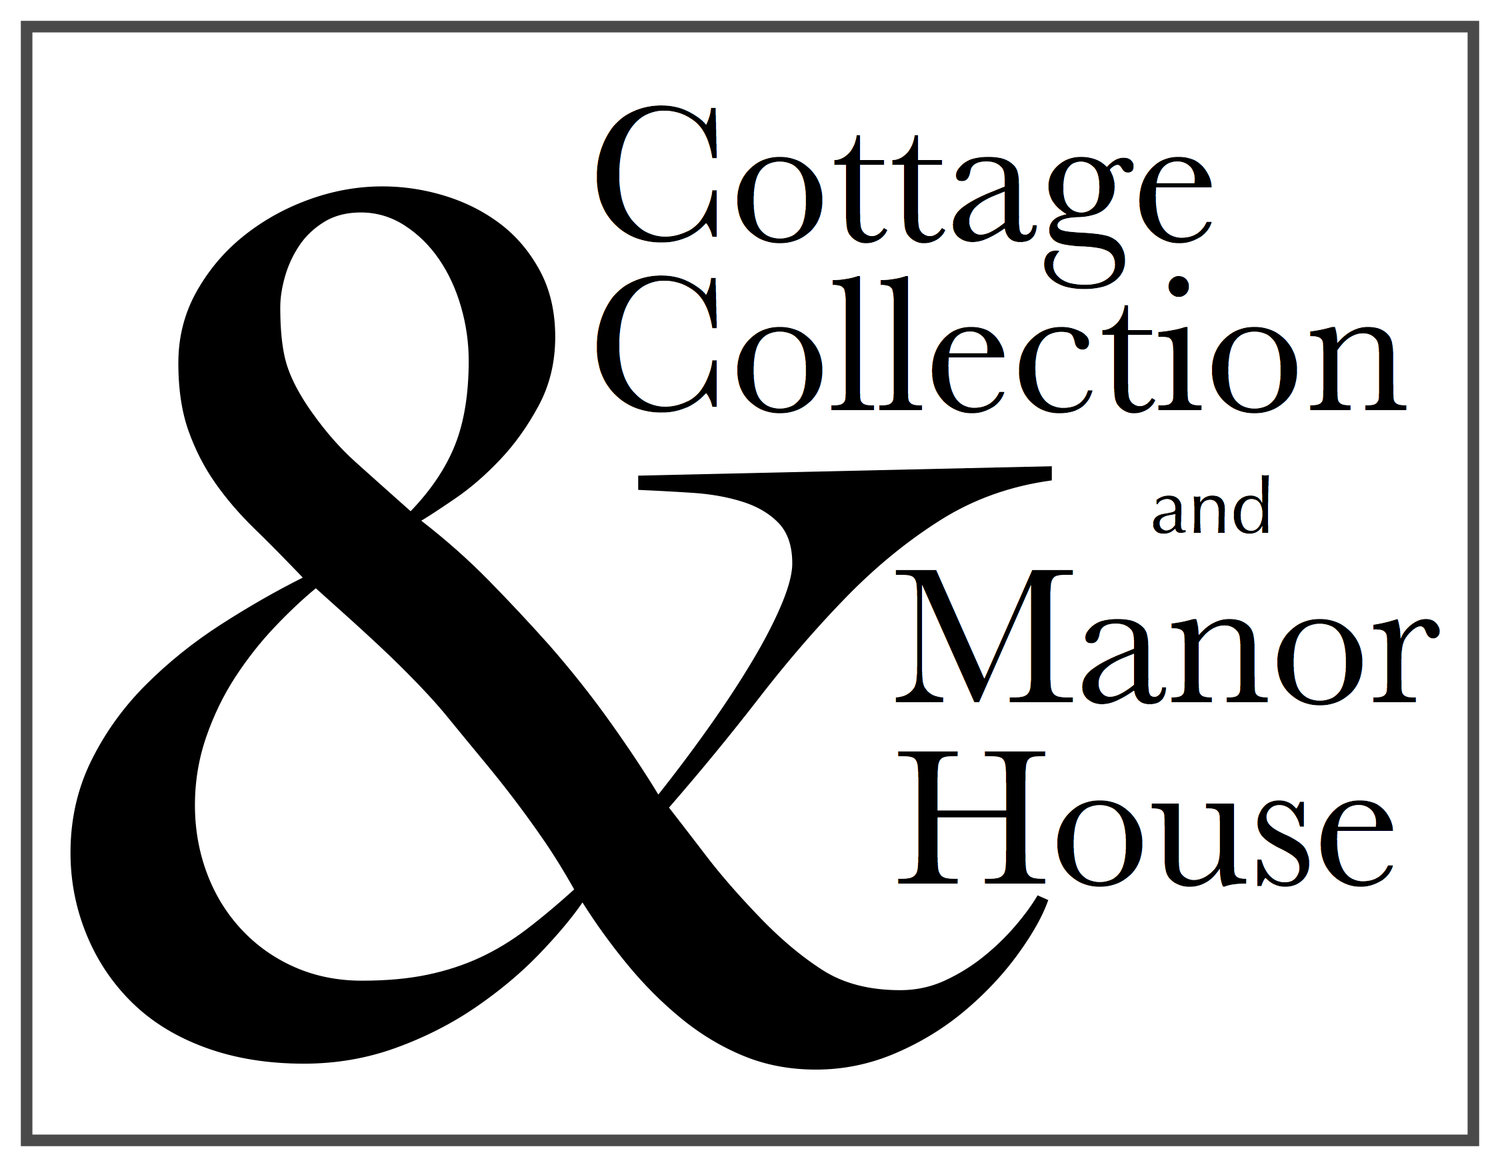 Cottage Collection and Manor House